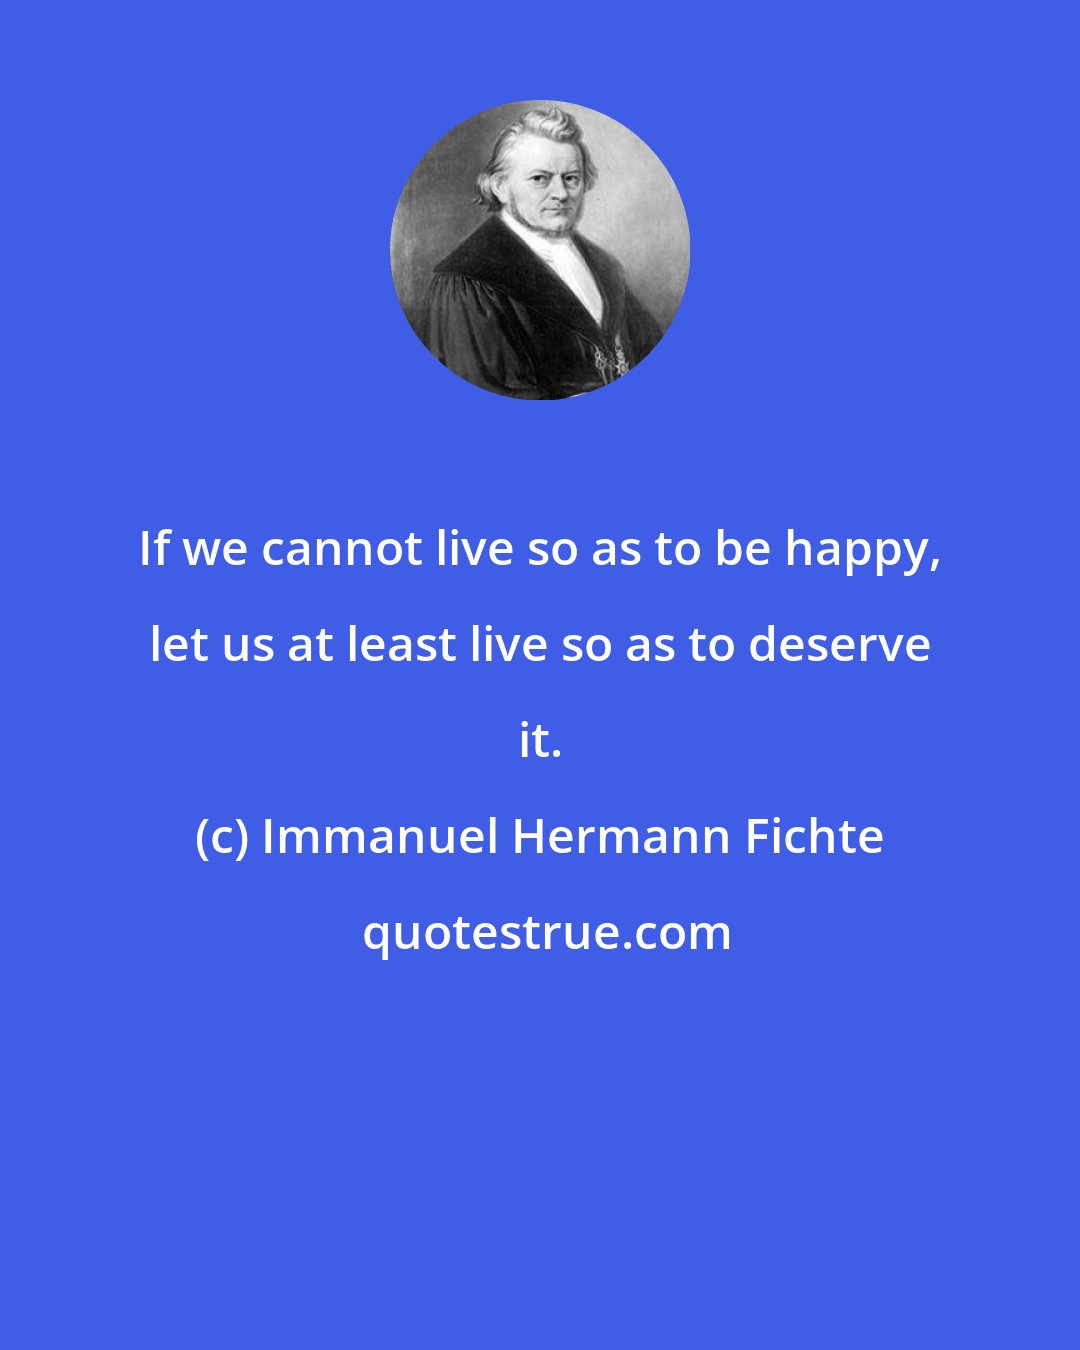 Immanuel Hermann Fichte: If we cannot live so as to be happy, let us at least live so as to deserve it.